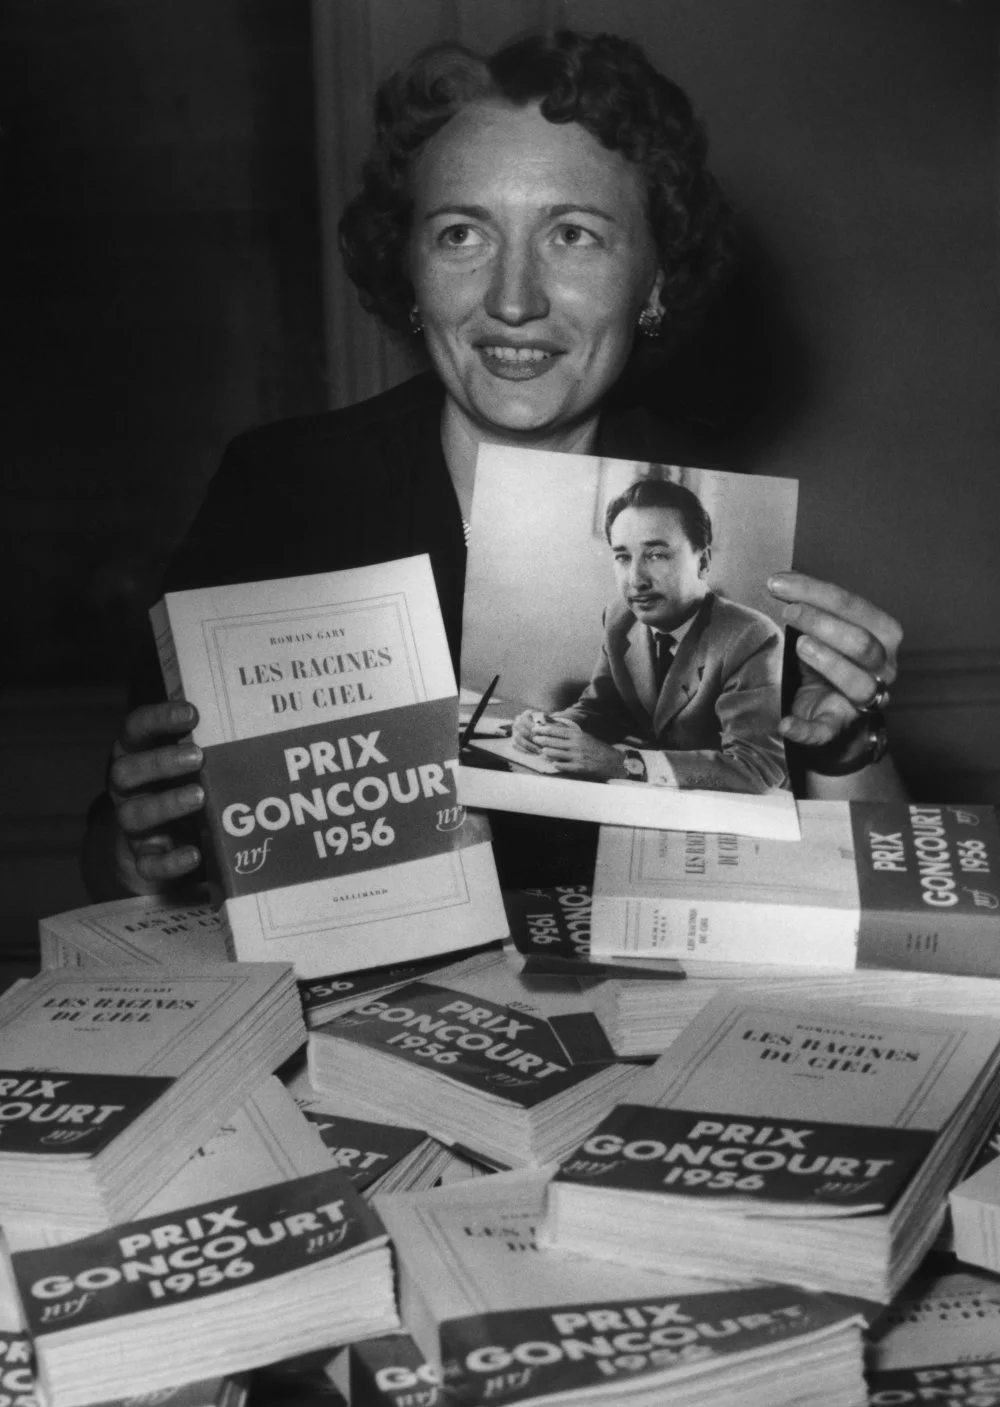 Copies of the book 'Les Racines du Ciel' ('The Roots of Heaven'), winner of the year's coveted Prix Goncourt, by French novelist, screenwriter, film director and diplomat Romain Gary, 3rd December 1956/Getty Images